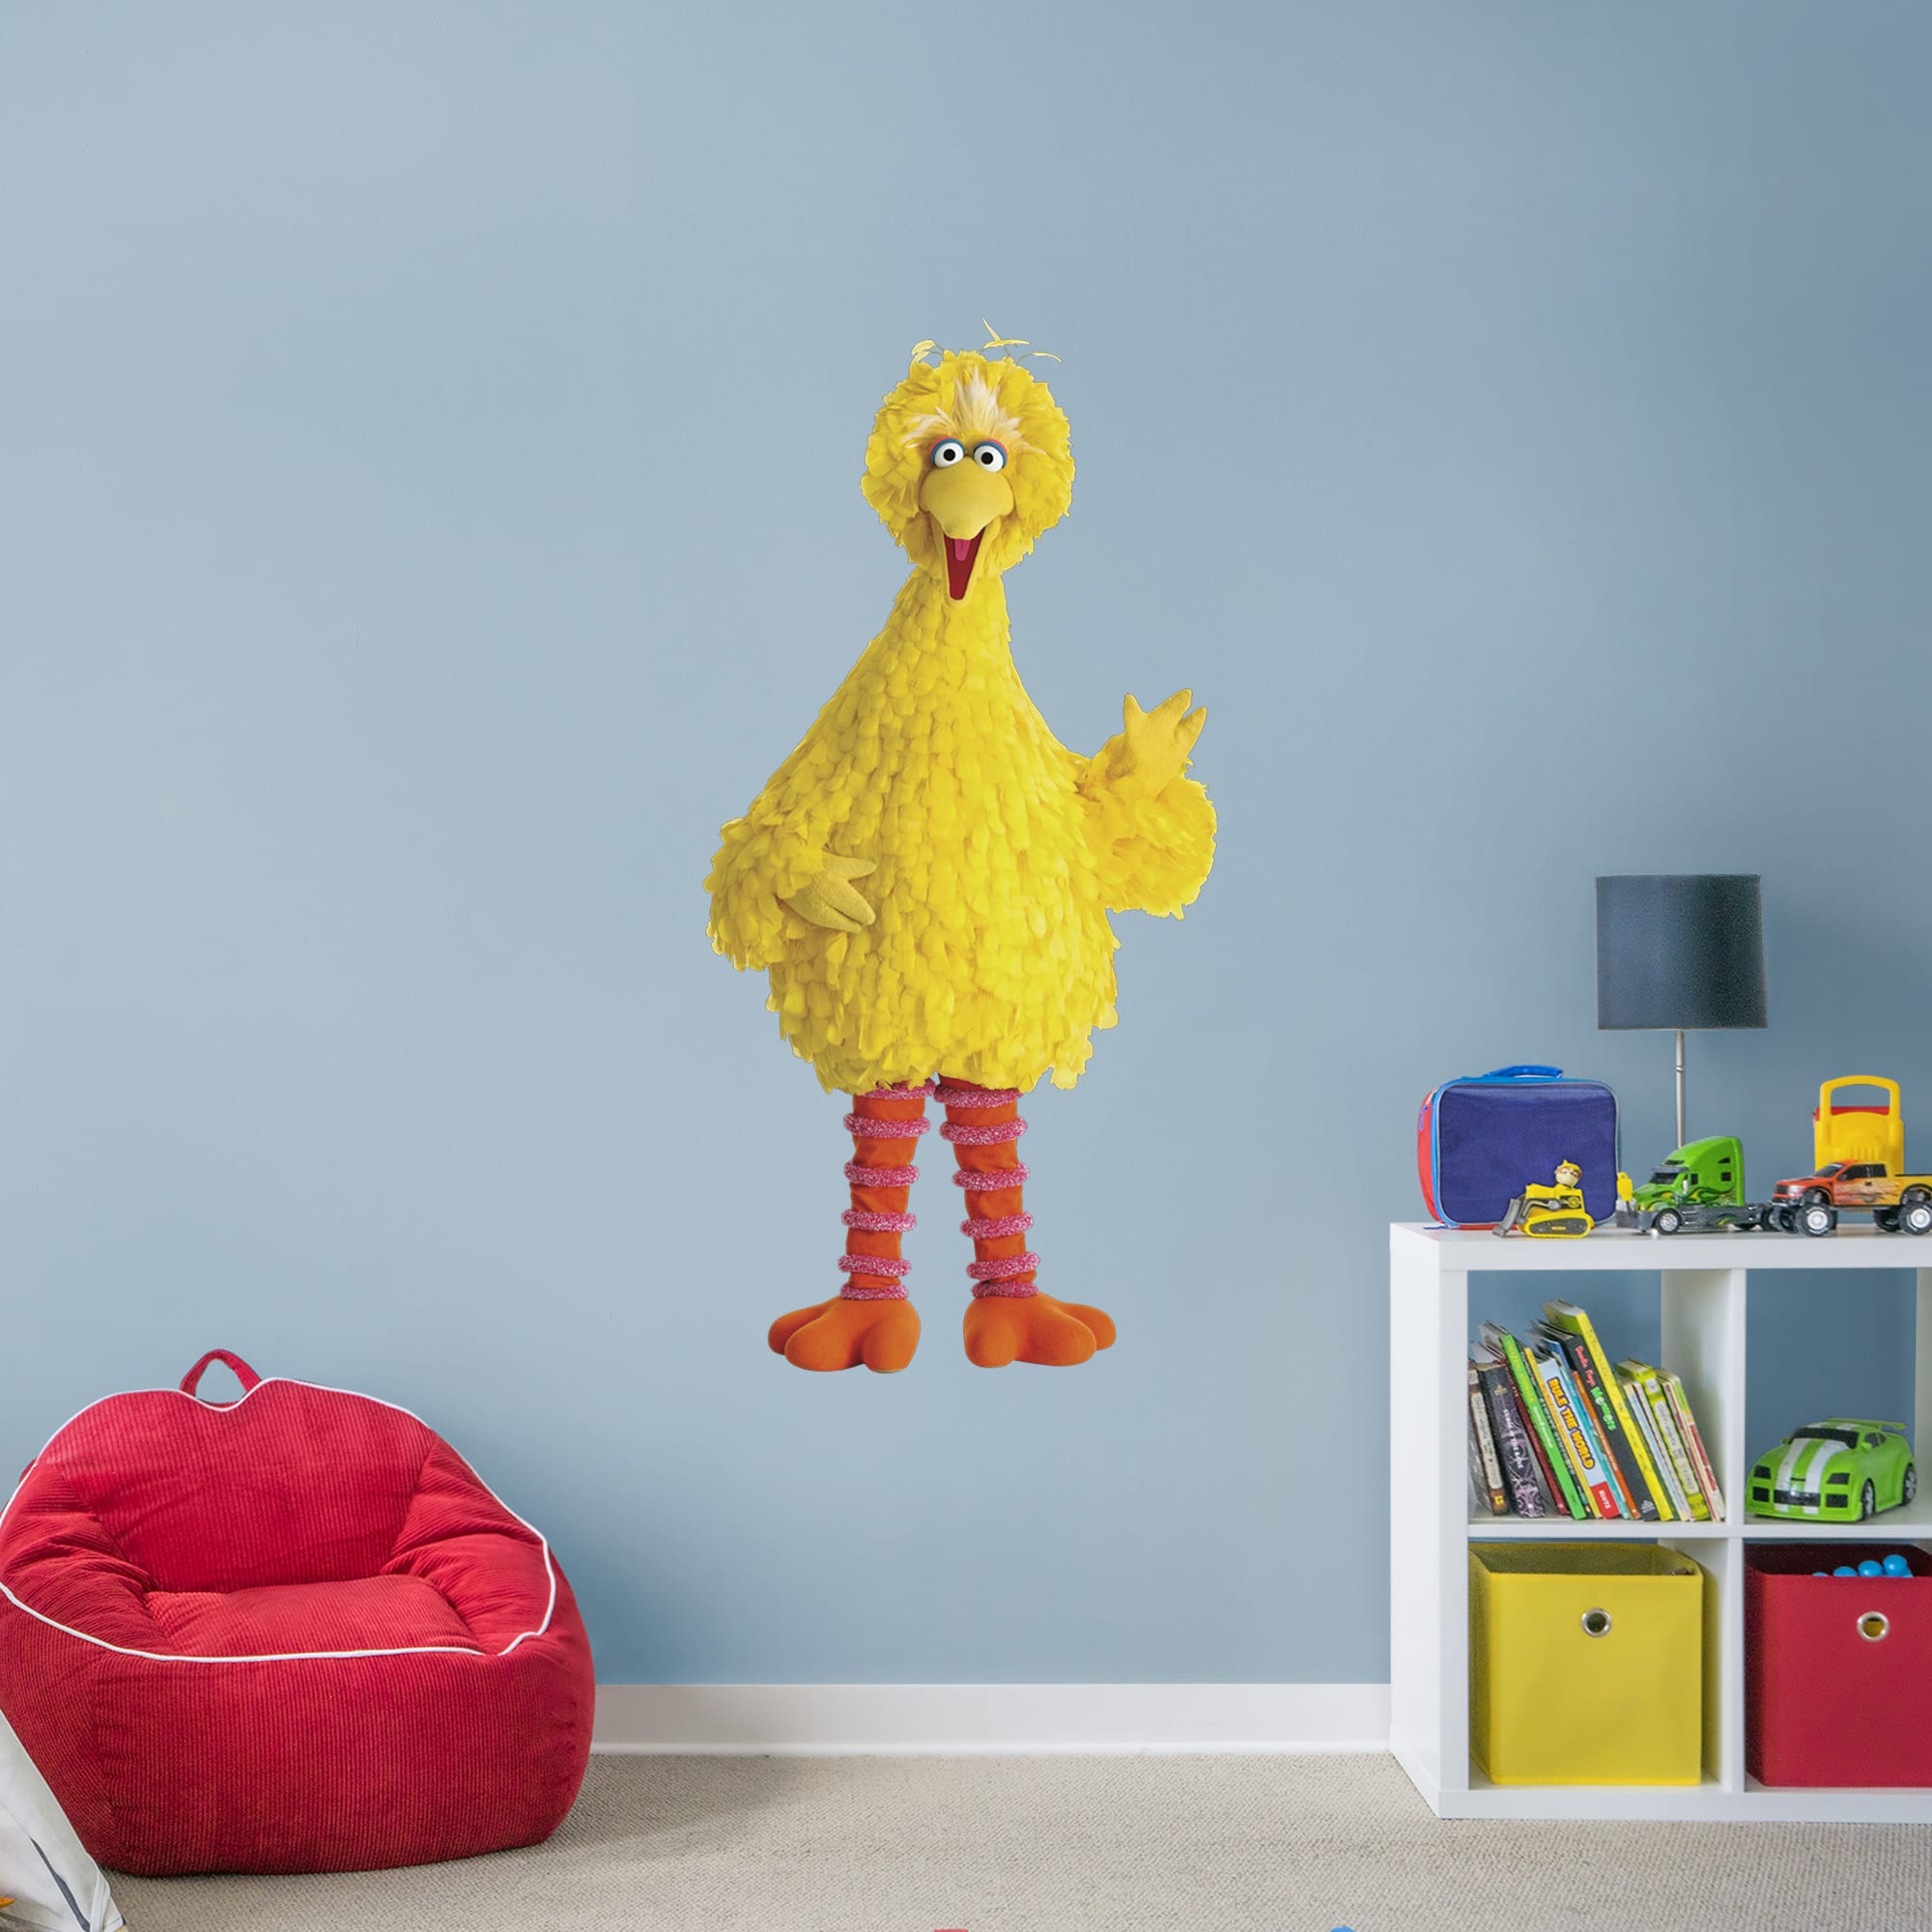 Big Bird - Officially Licensed Sesame Street Removable Wall Decal Giant Character + 2 Licensed Decals (25"W x 52"H) by Fathead |